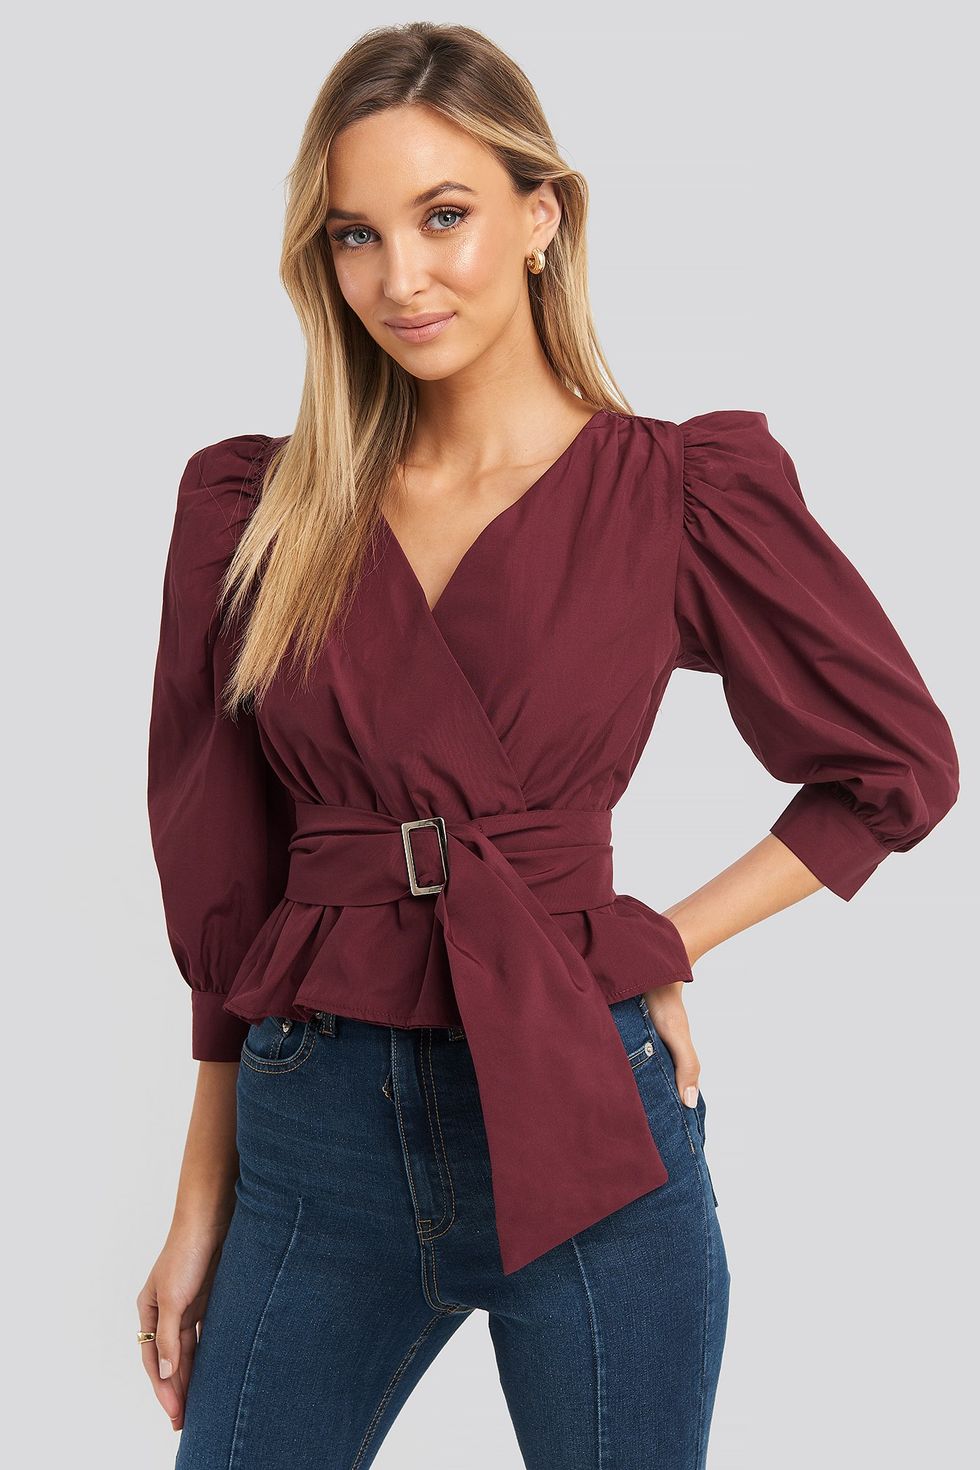 Clothing, Sleeve, Outerwear, Neck, Photo shoot, Waist, Maroon, Blouse, Top, Photography, 